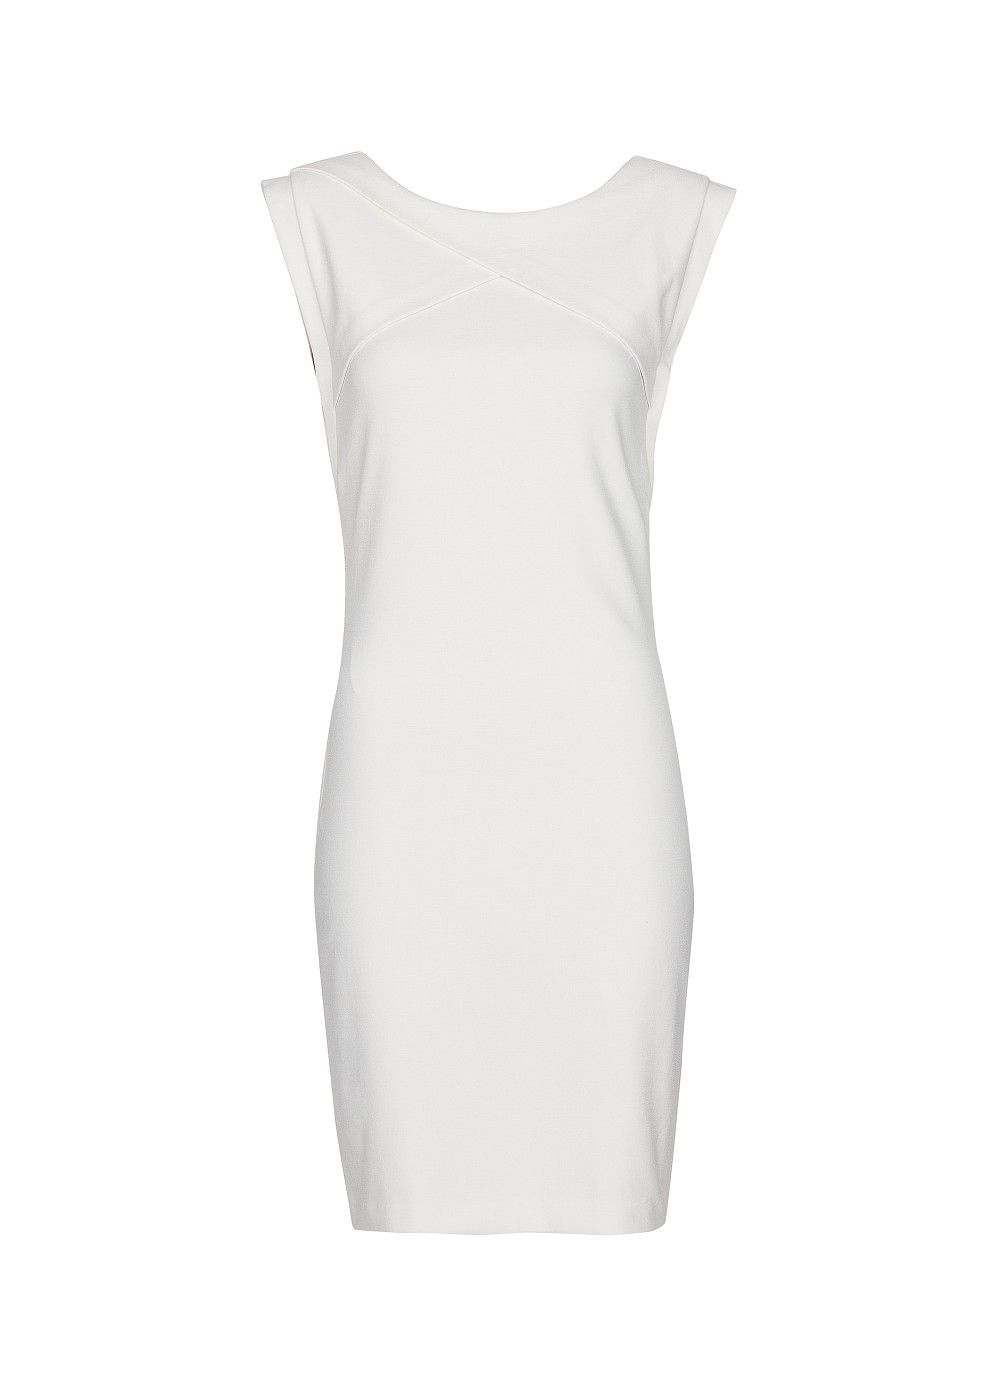 Mango Origami Stretchjersey Dress in White (Off White)